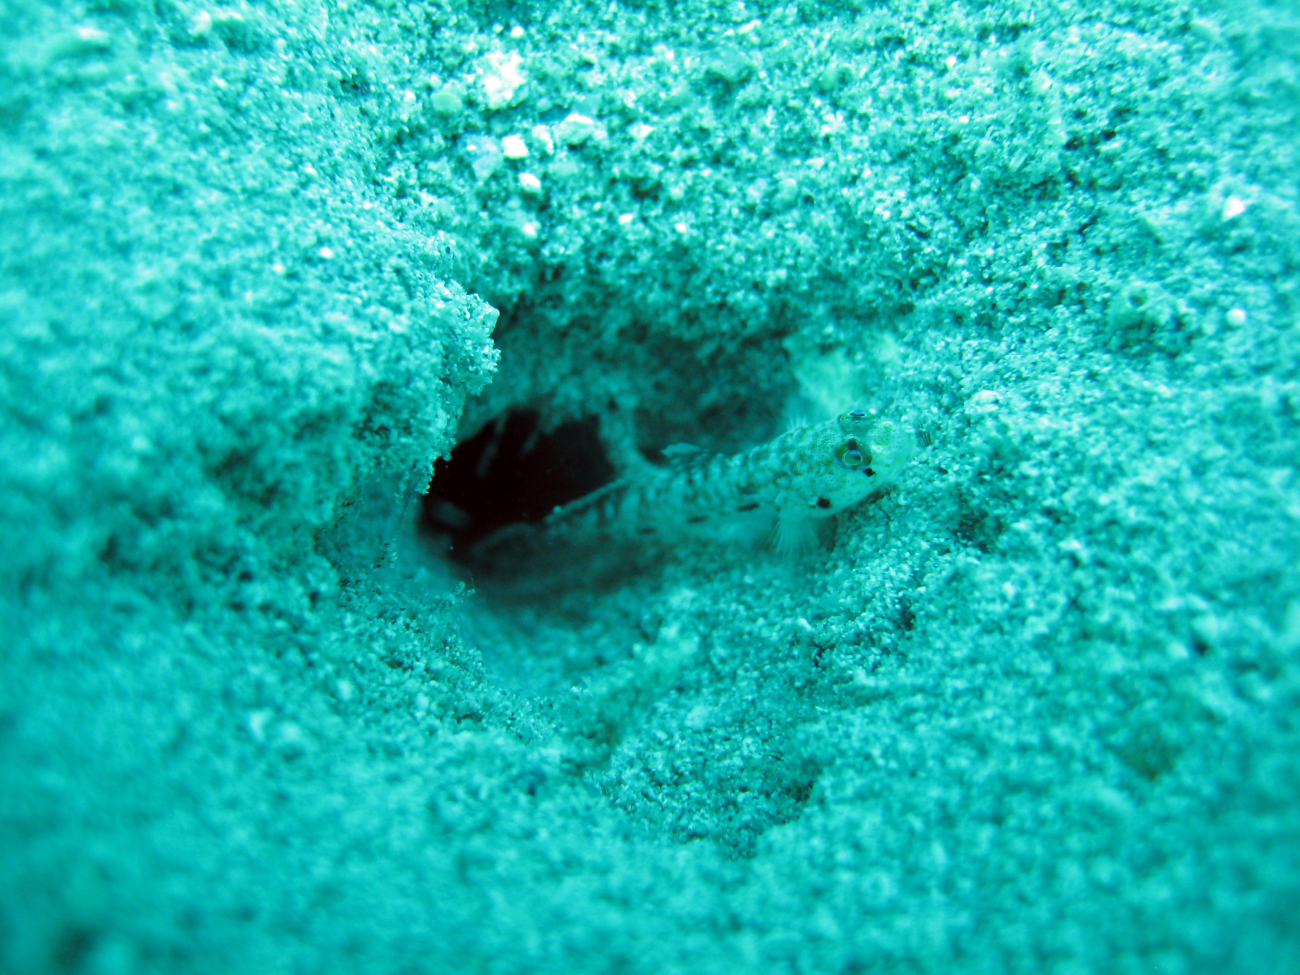 Dash goby (Ctenogobius saepepallens) at the entrance to its burrow